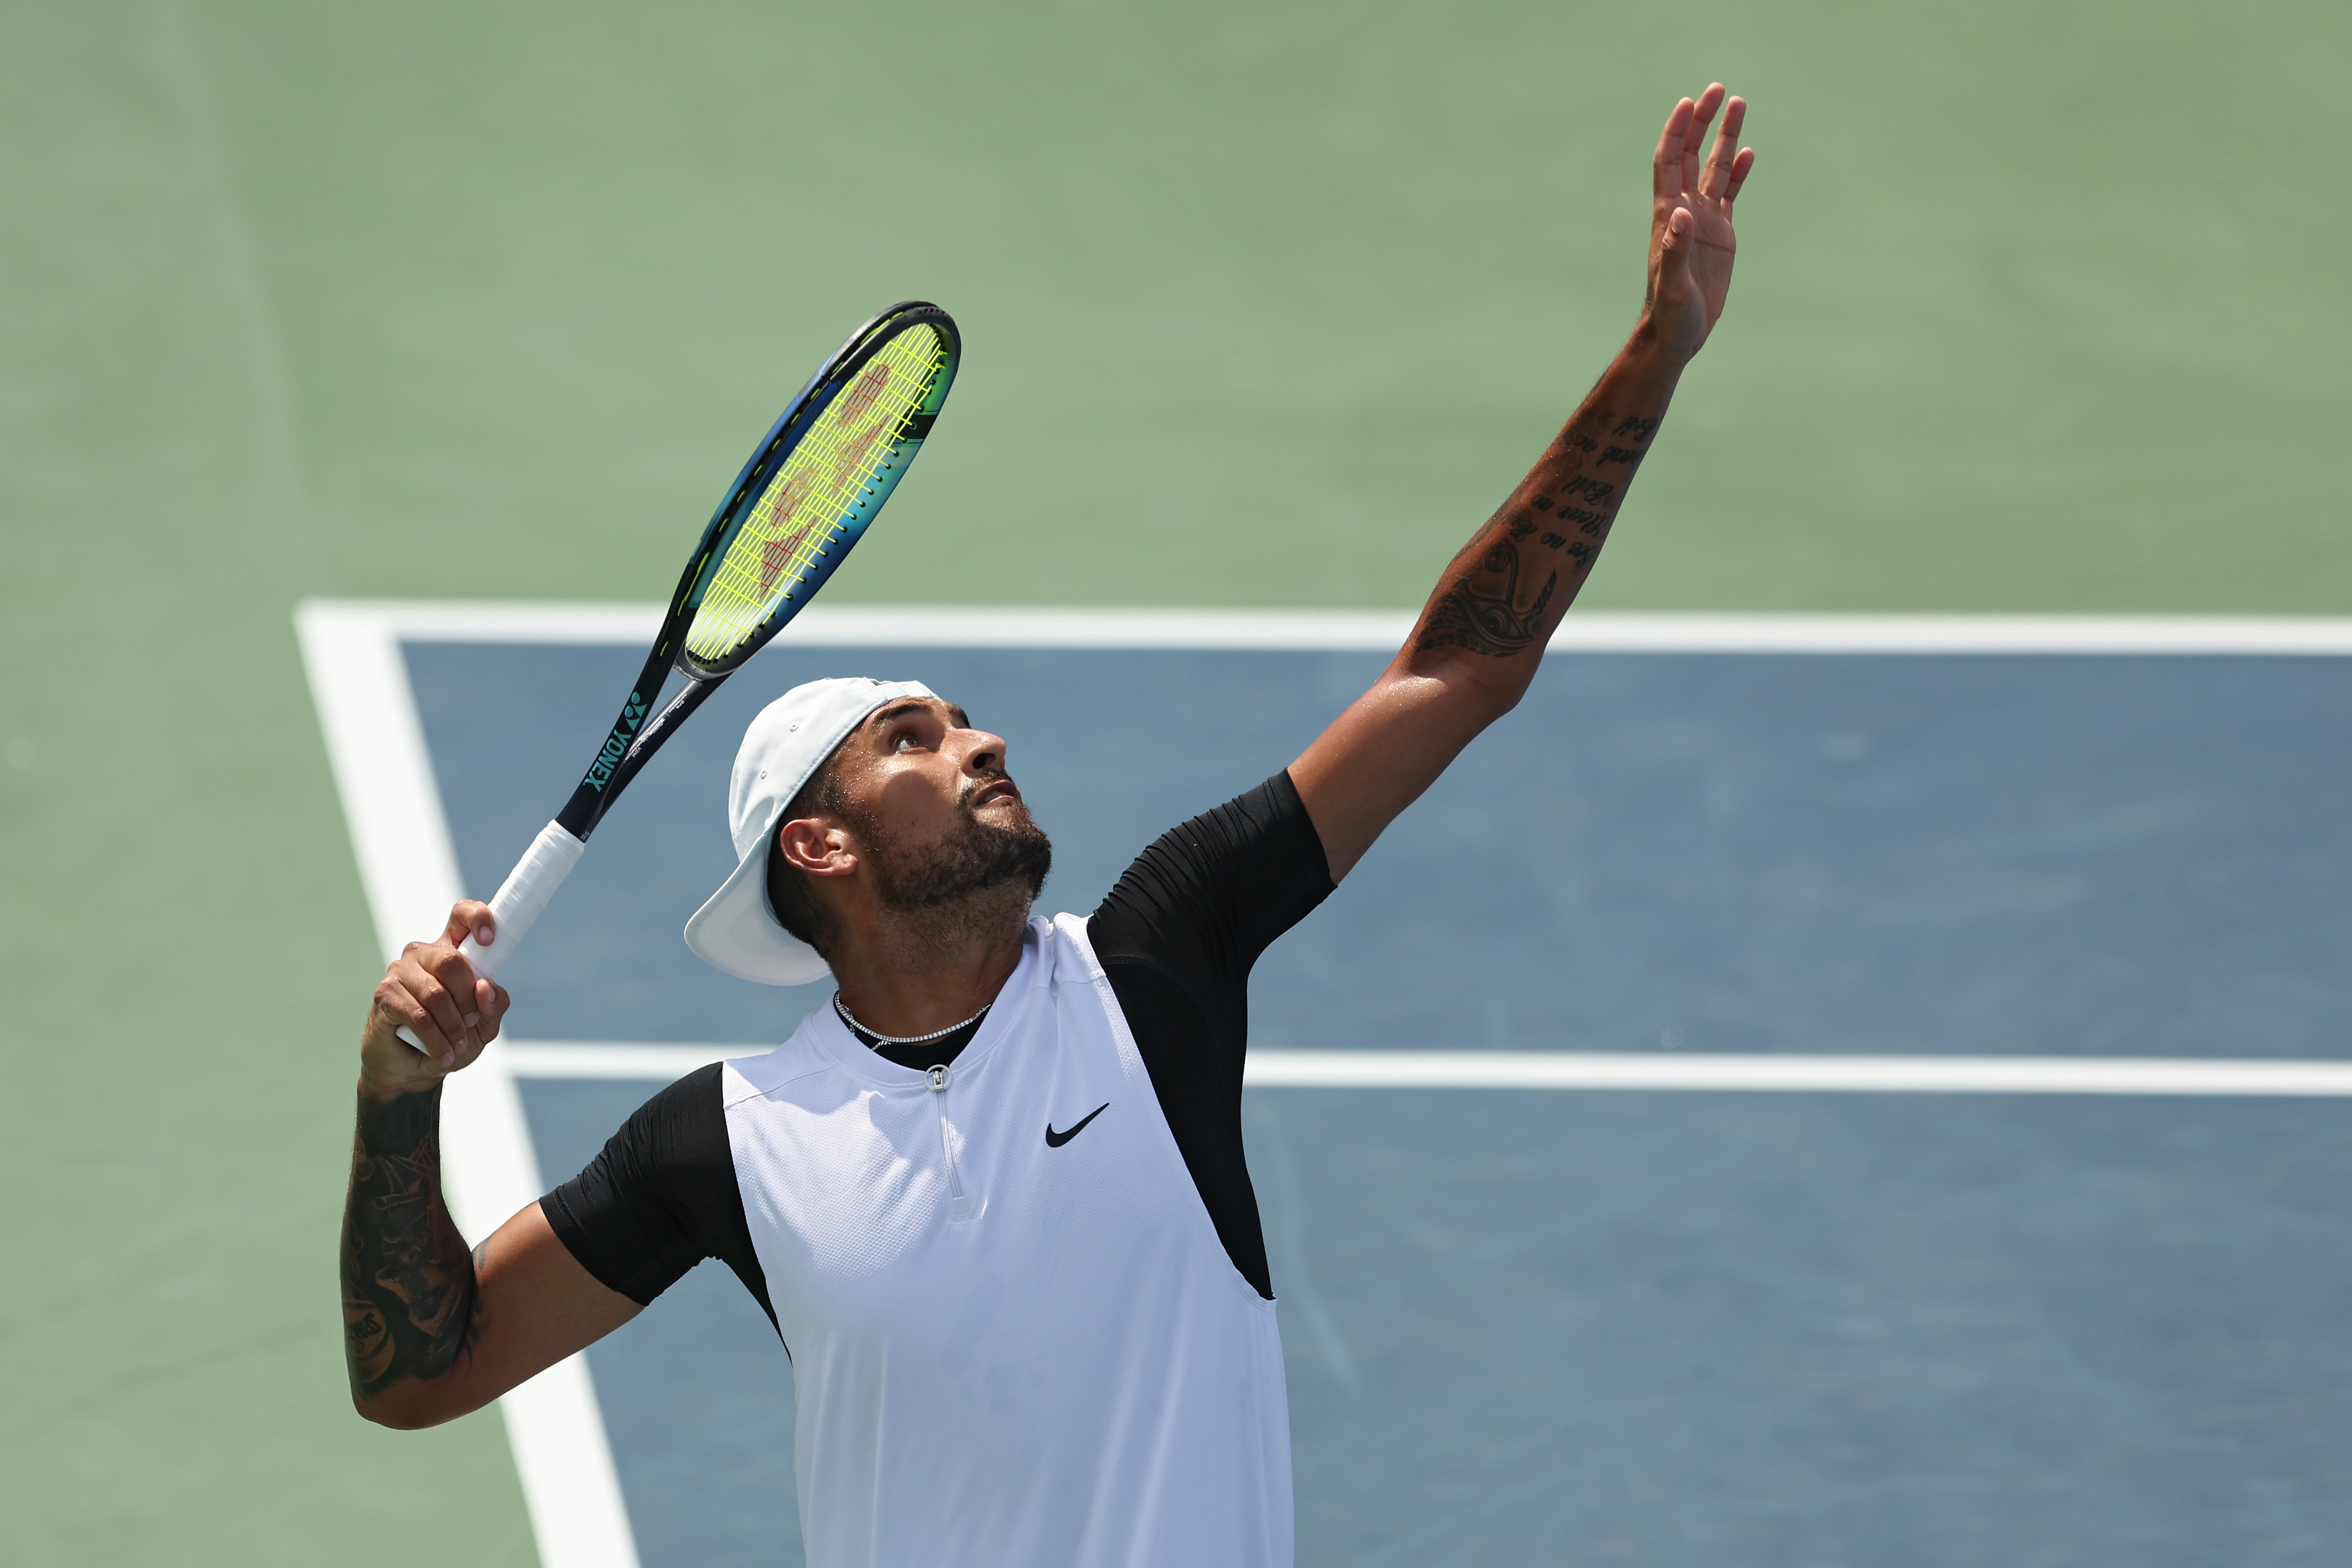 Stat of the Day Nick Kyrgios has now held 79 of his last 80 service games